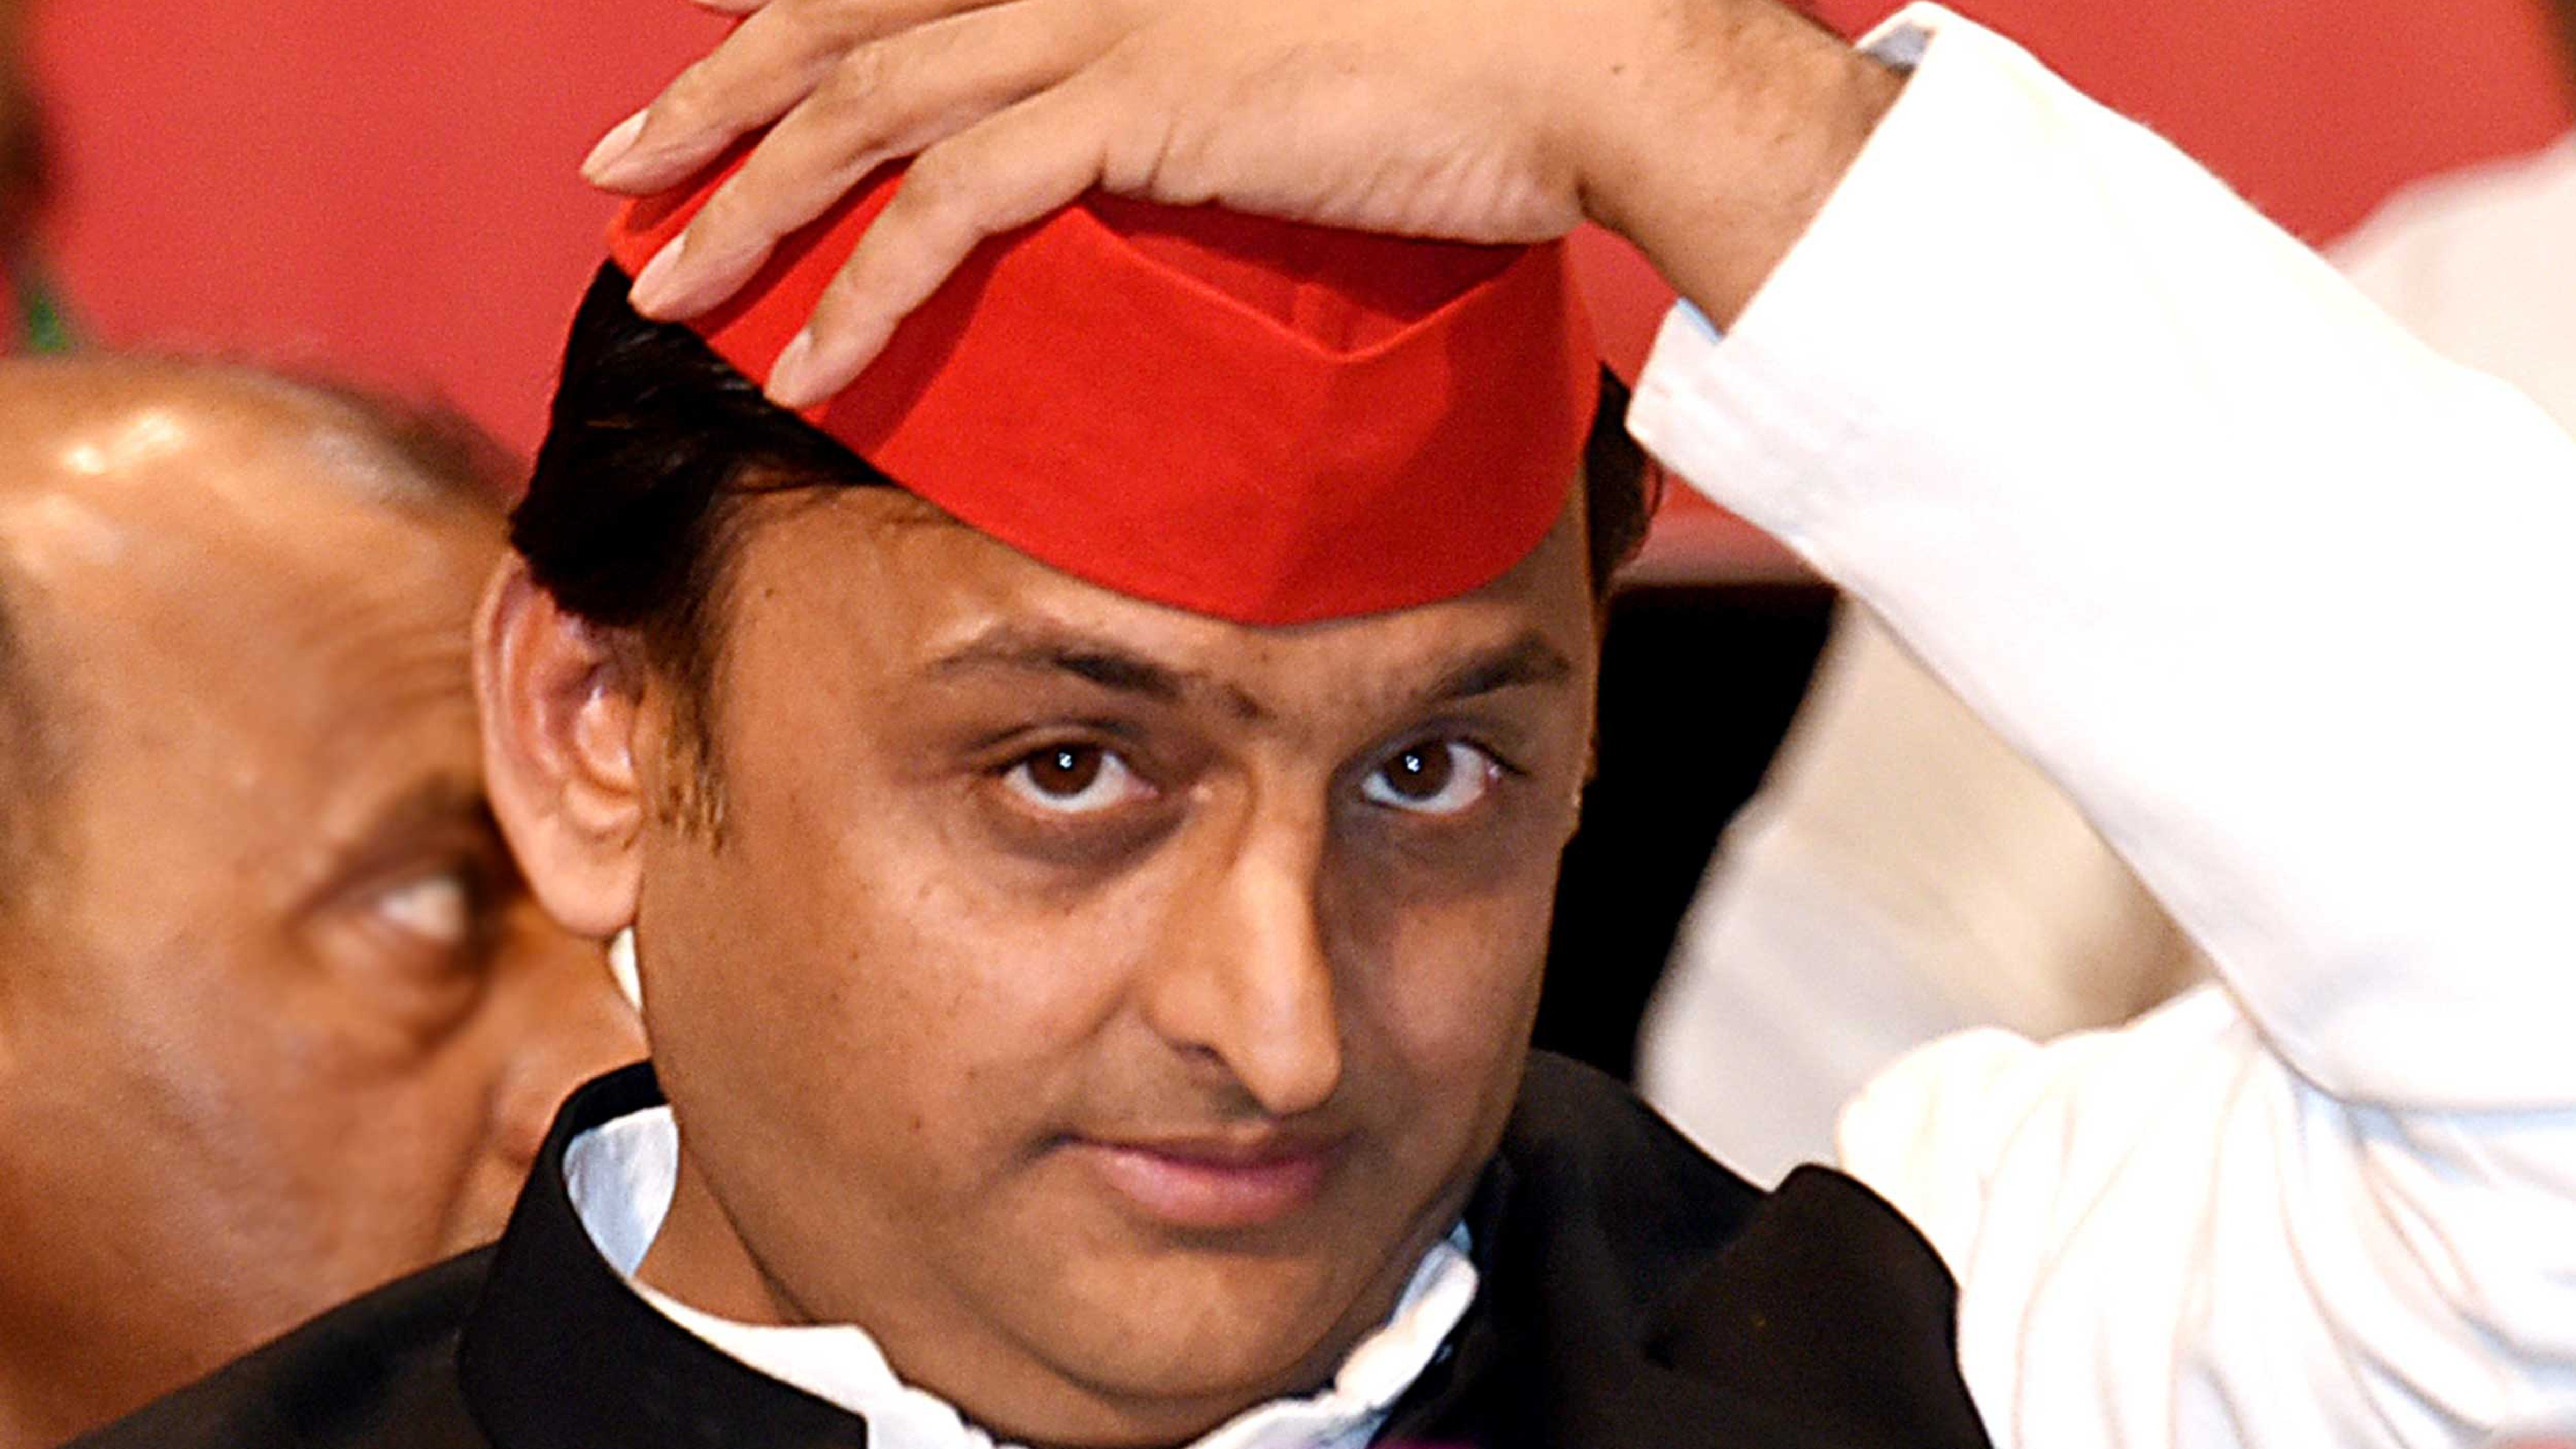 Akhilesh Yadav countered Prime Minister Modi’s “mahamilawat” taunt at the Opposition coalition, saying that if anyone can keep the BJP from returning to power, it would be the coalition leaders.